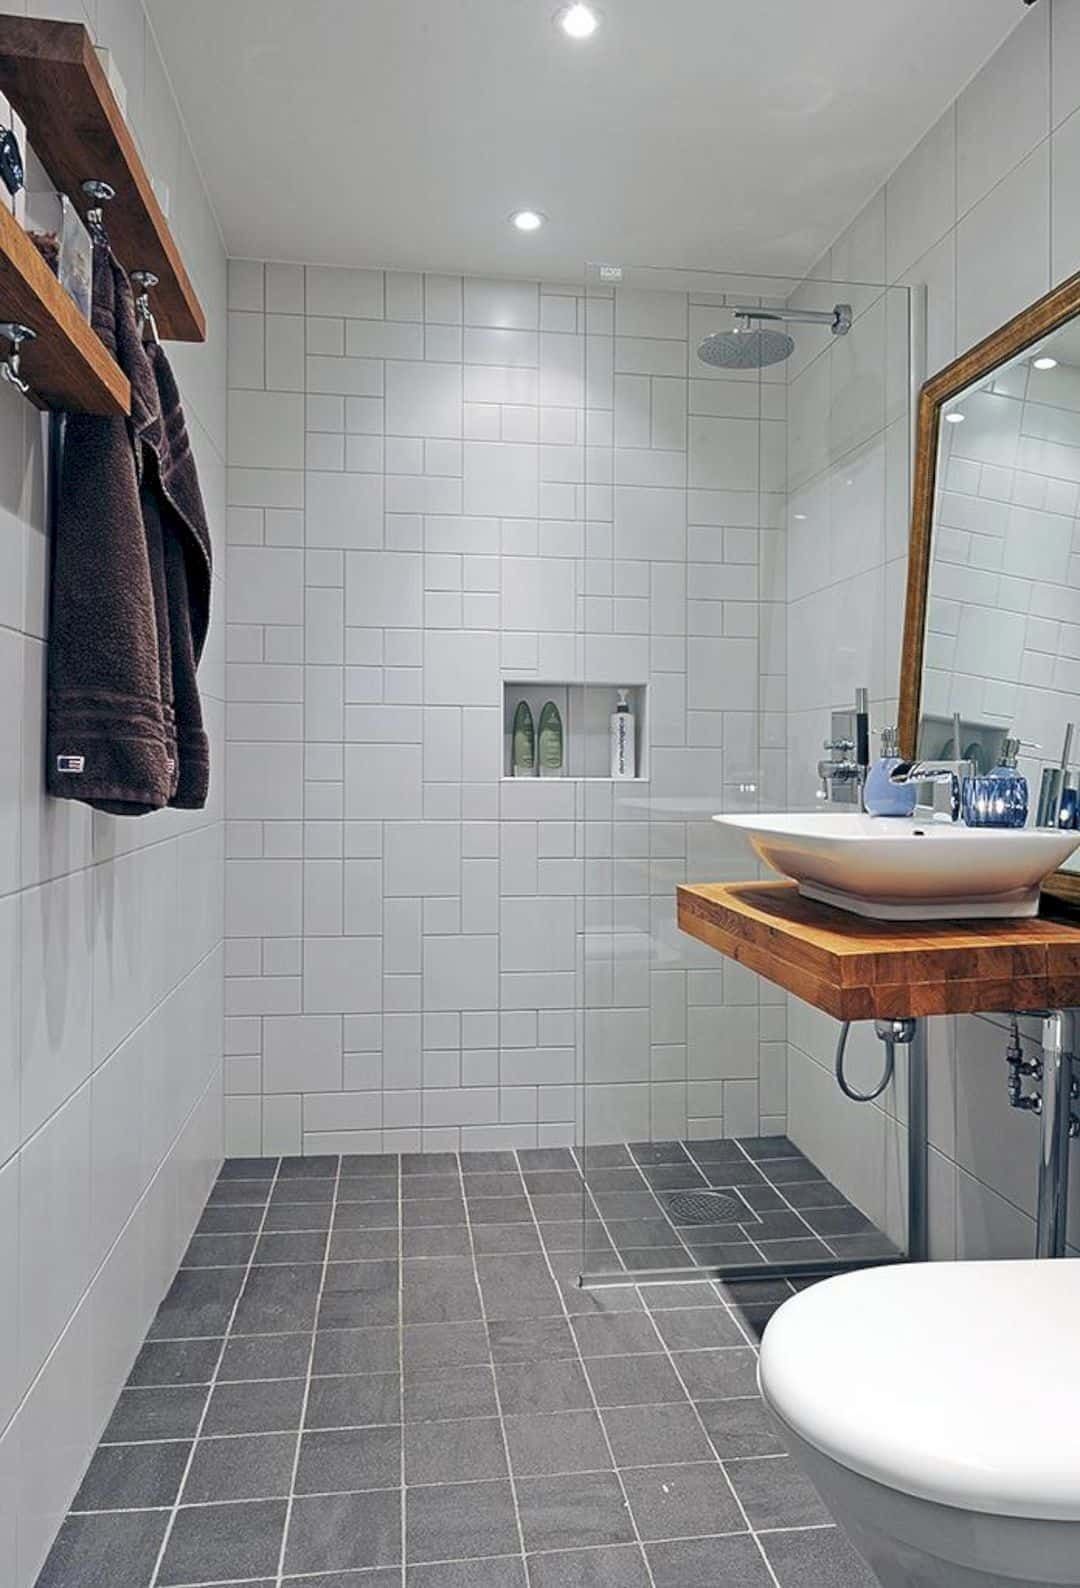 25 Tranquil Scandinavian Bathroom Decor To Get Rid Of Daily Stress - N25